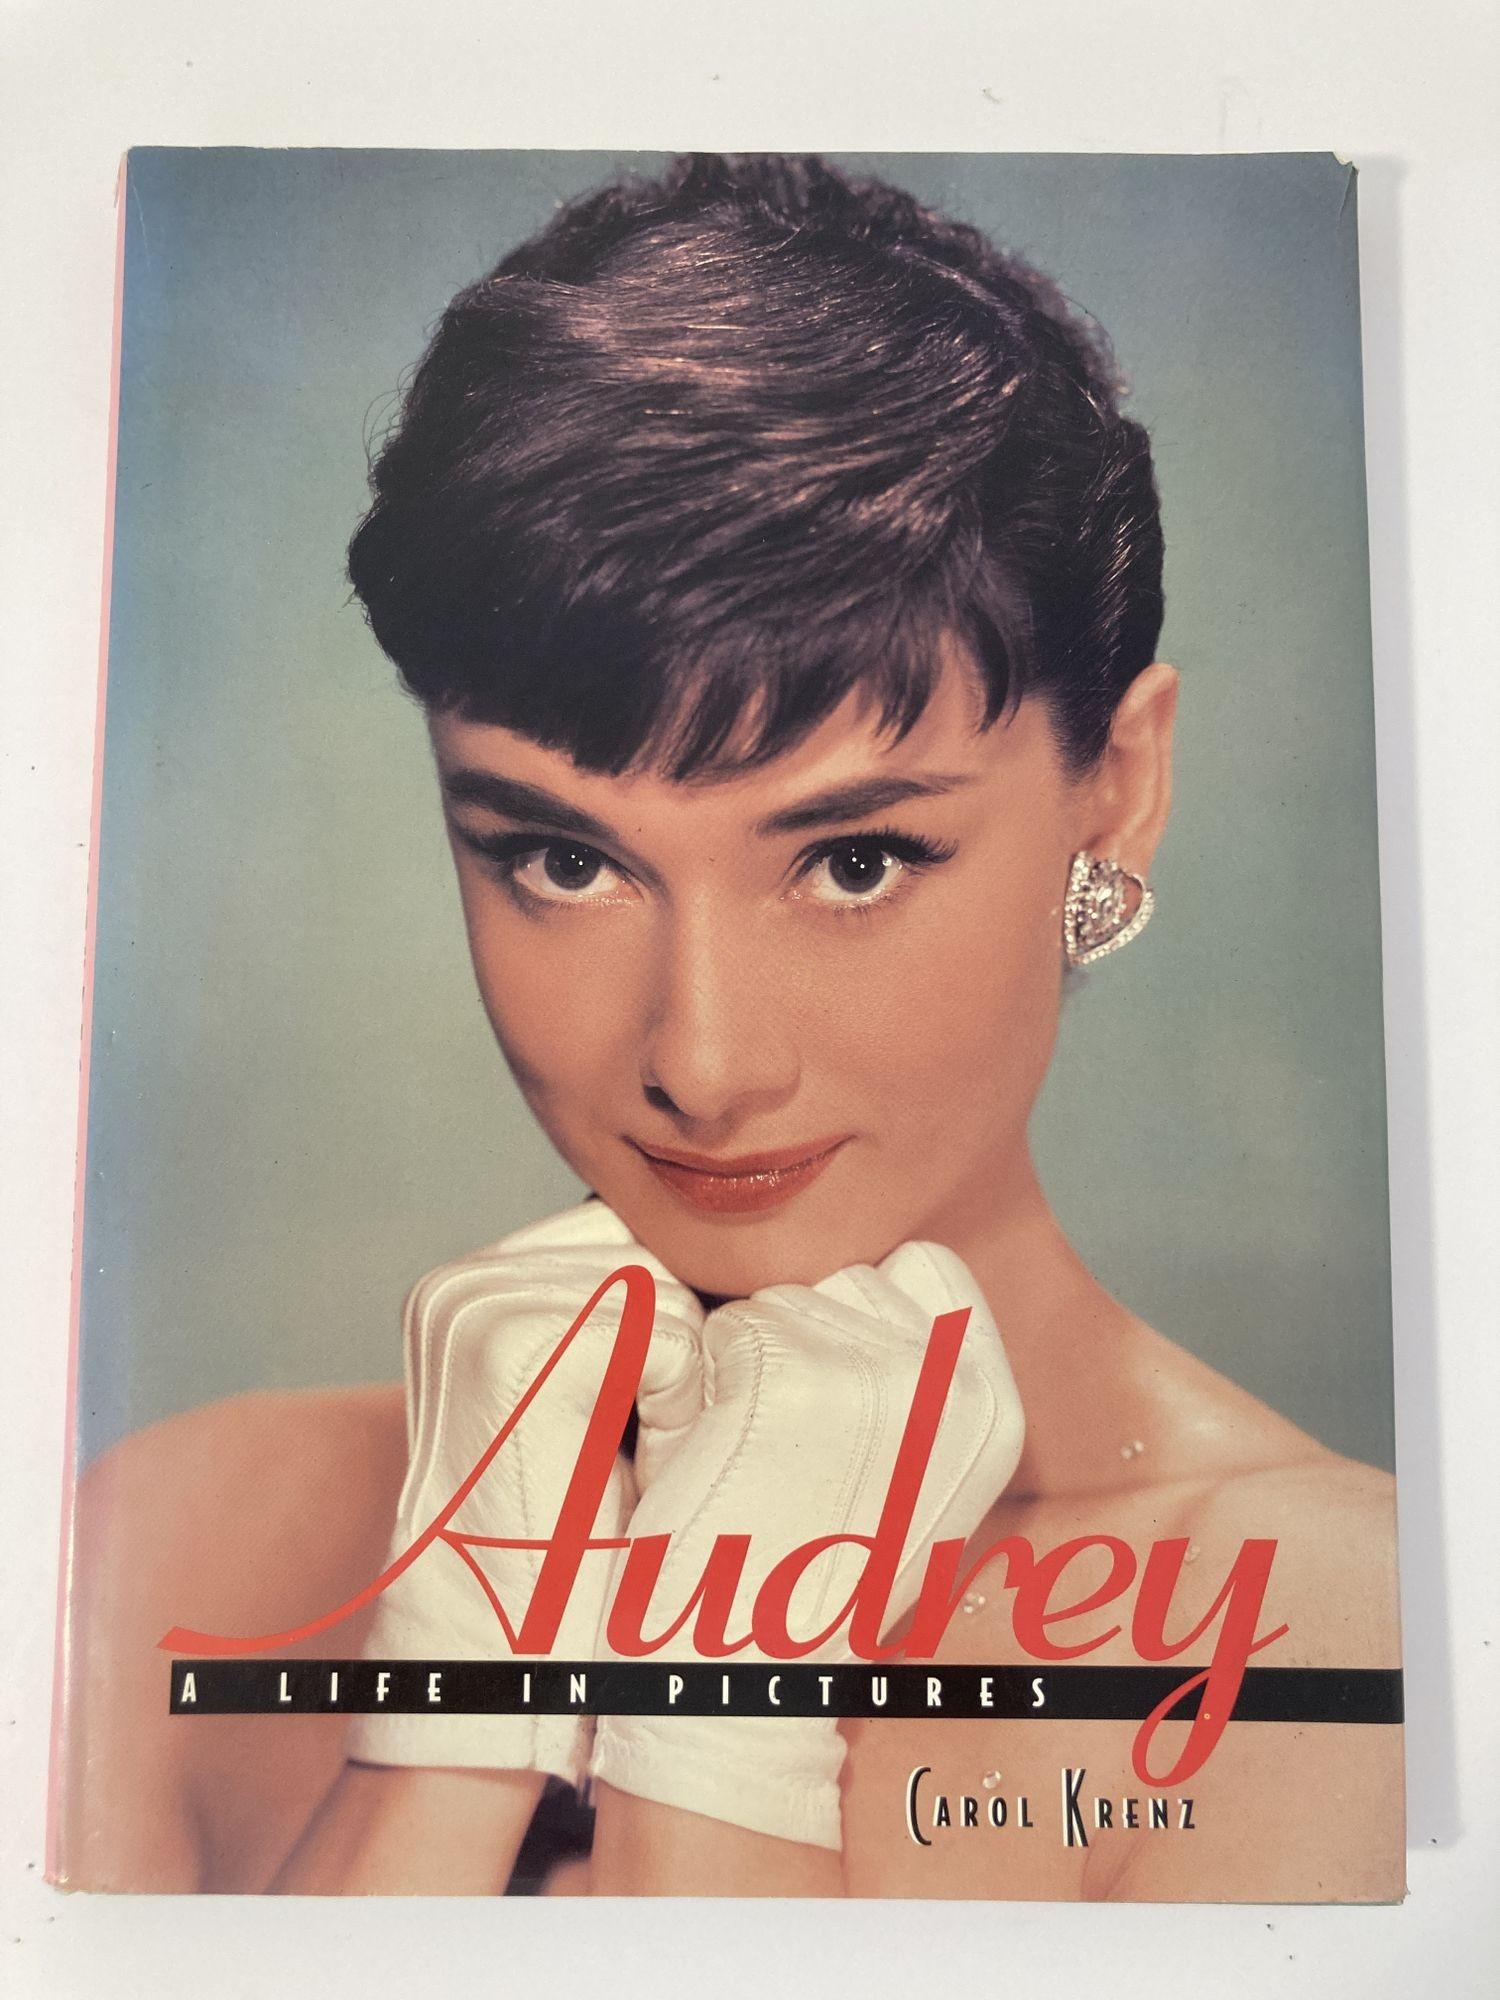 Audrey: A Life in Pictures Carol Krenz Metrobooks, 1997.
Beautiful colored pictures of Audrey that you will love. Wonderful big coffee table book. Remember Audrey in all her favorite pictures and poses.
Virtual personal photo album of a legendary